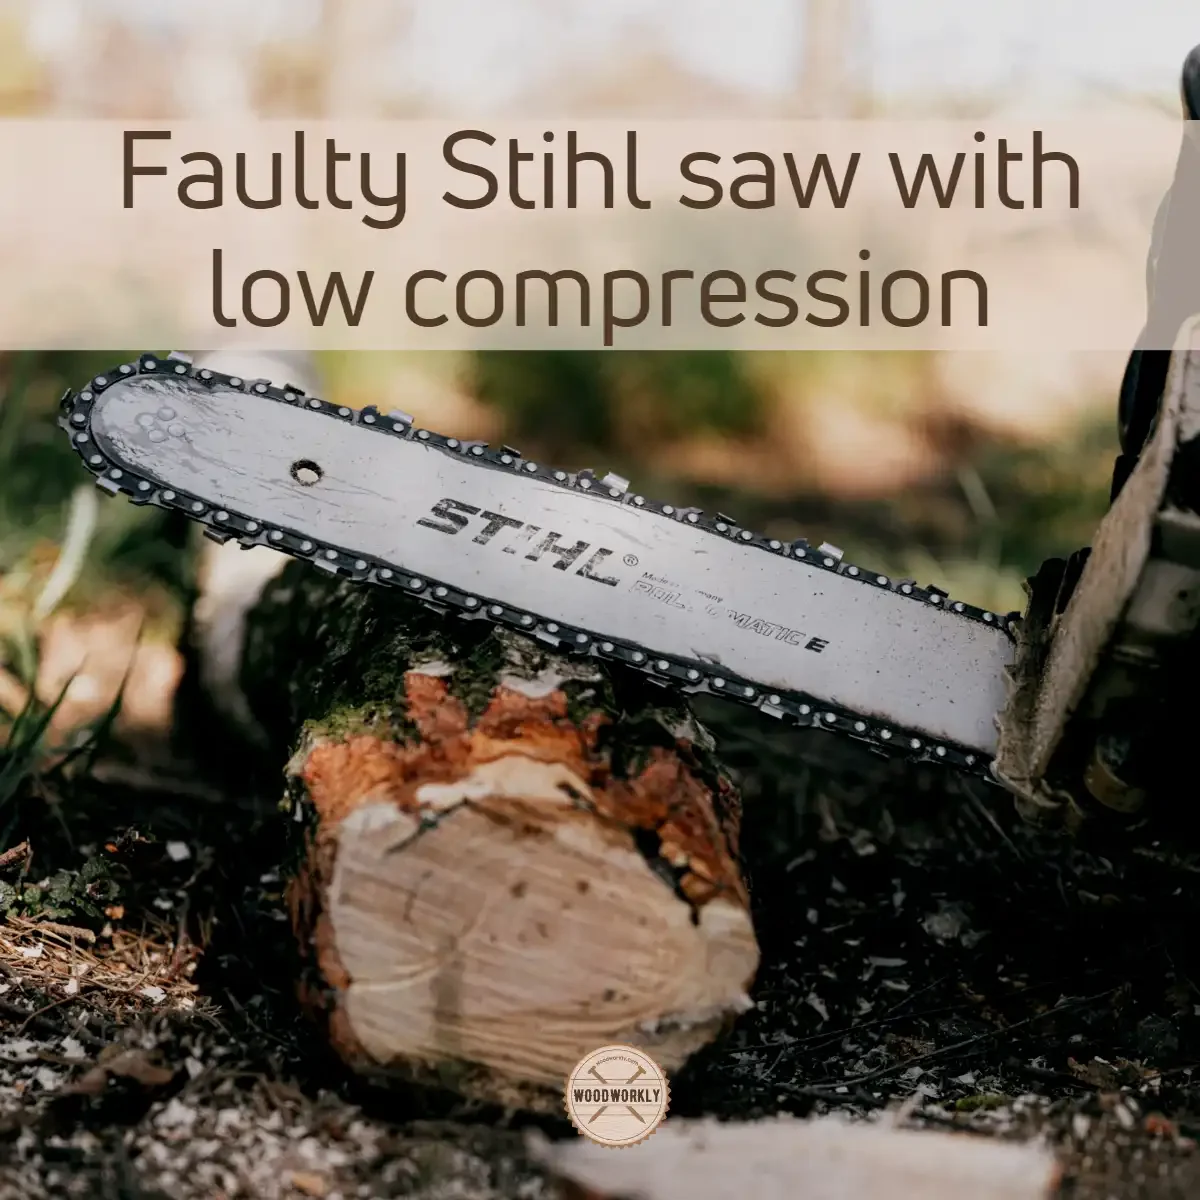 Faulty Stihl saw with low compression